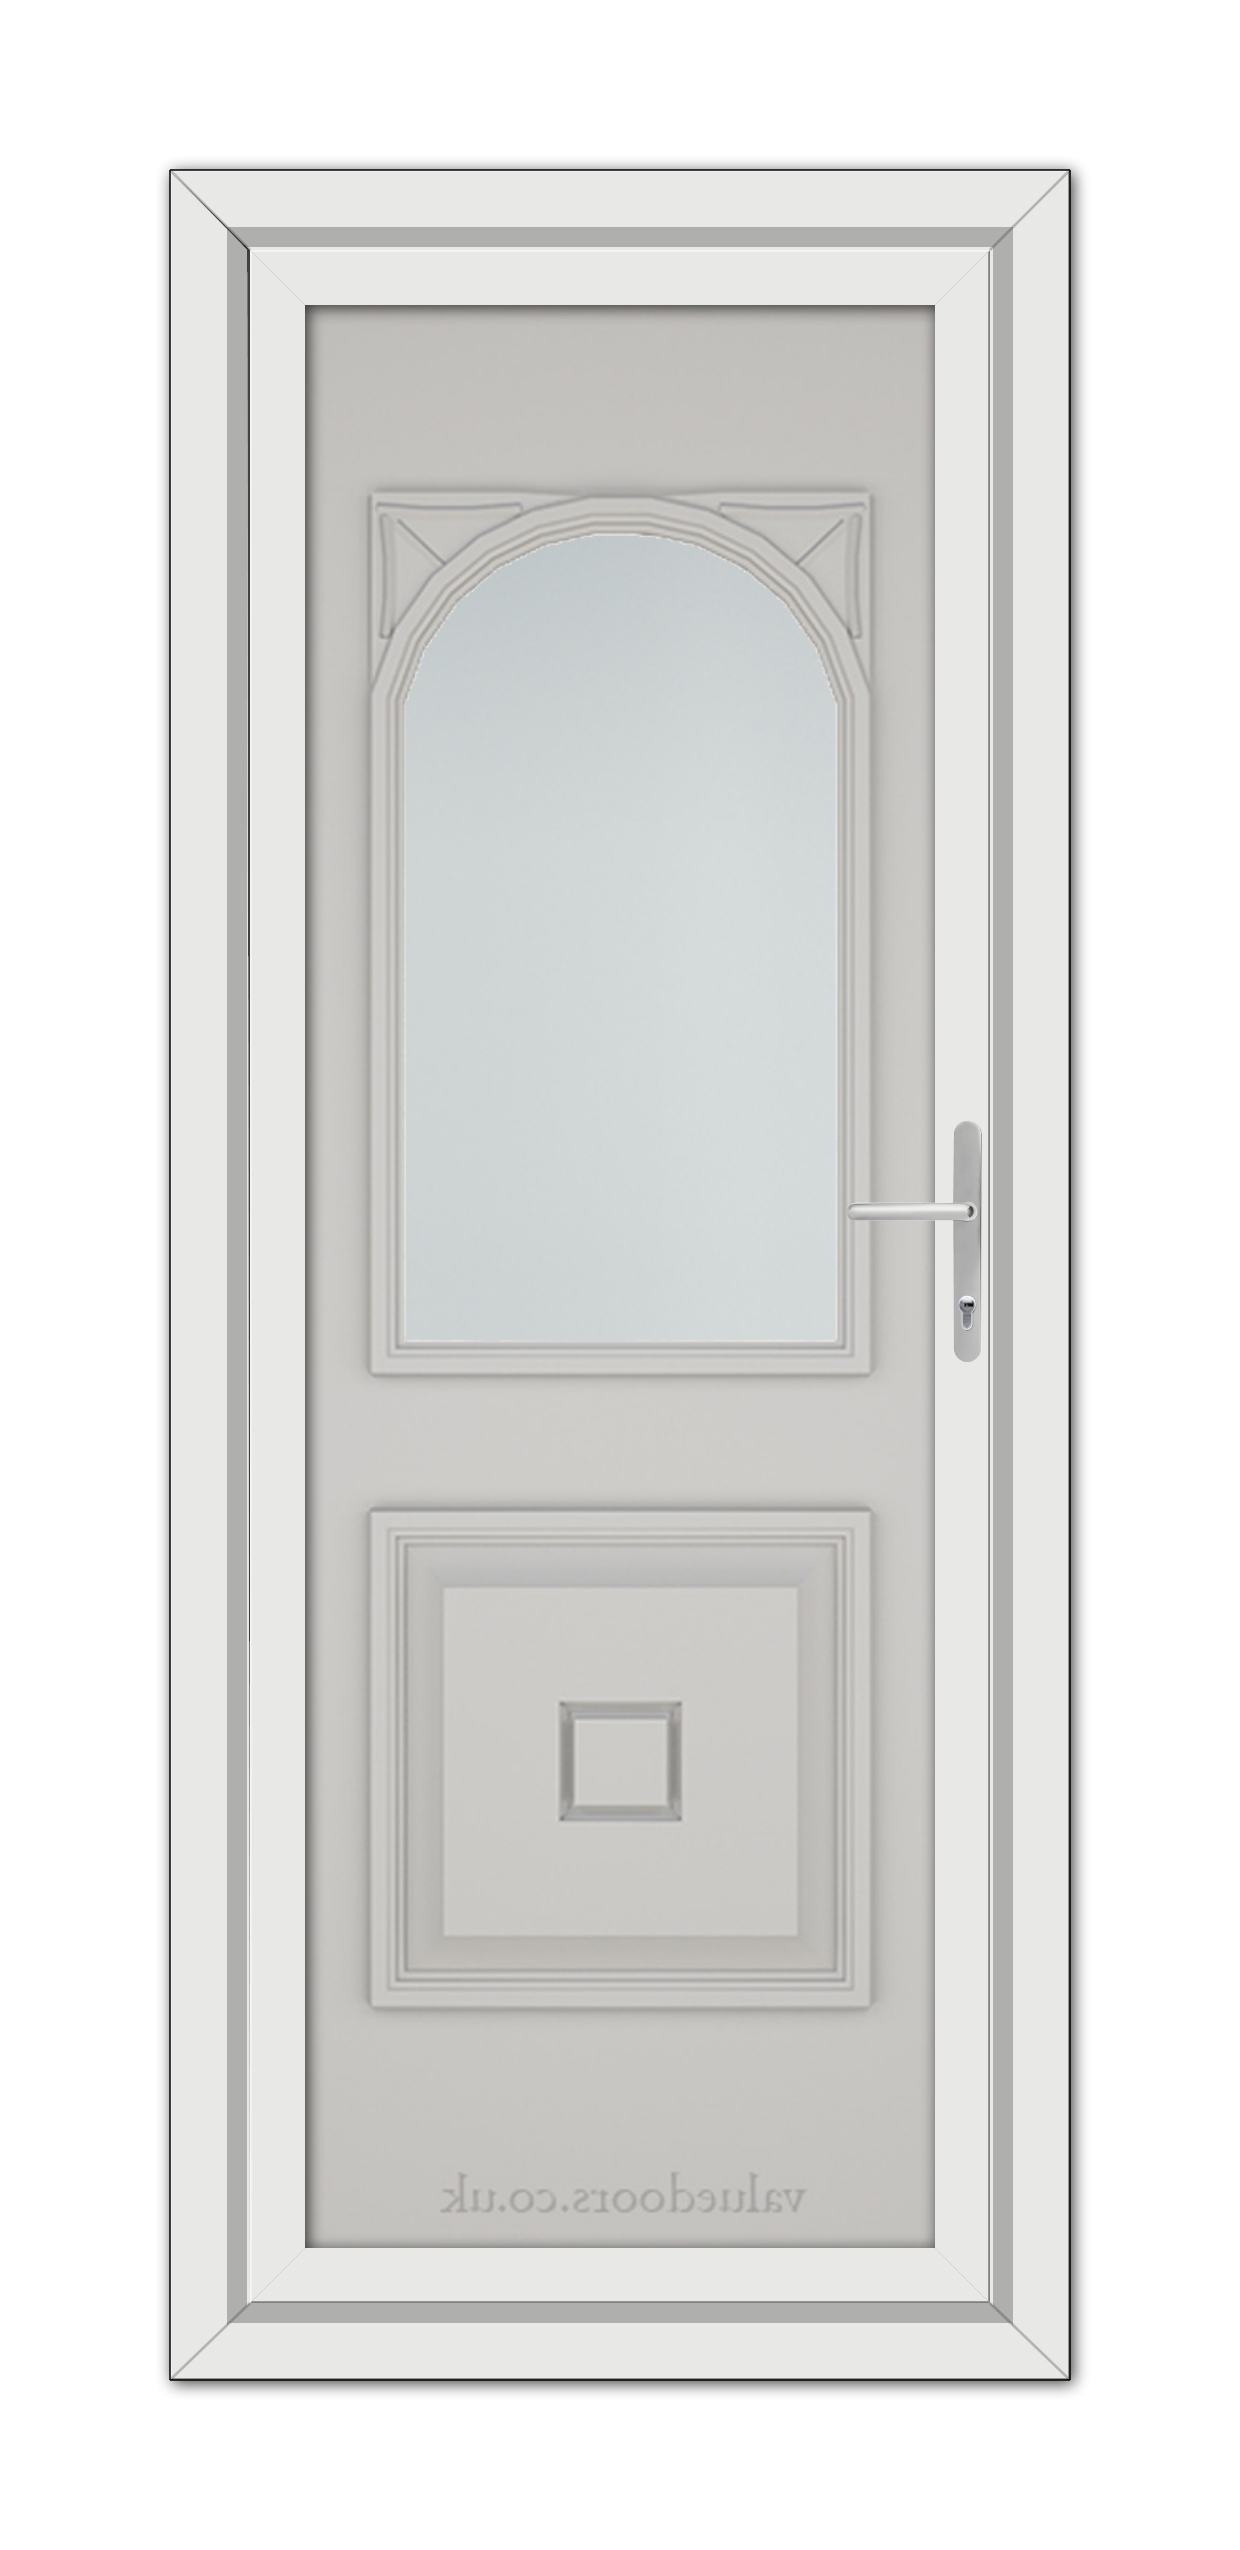 A Silver Grey Reims uPVC Door with a glass panel.